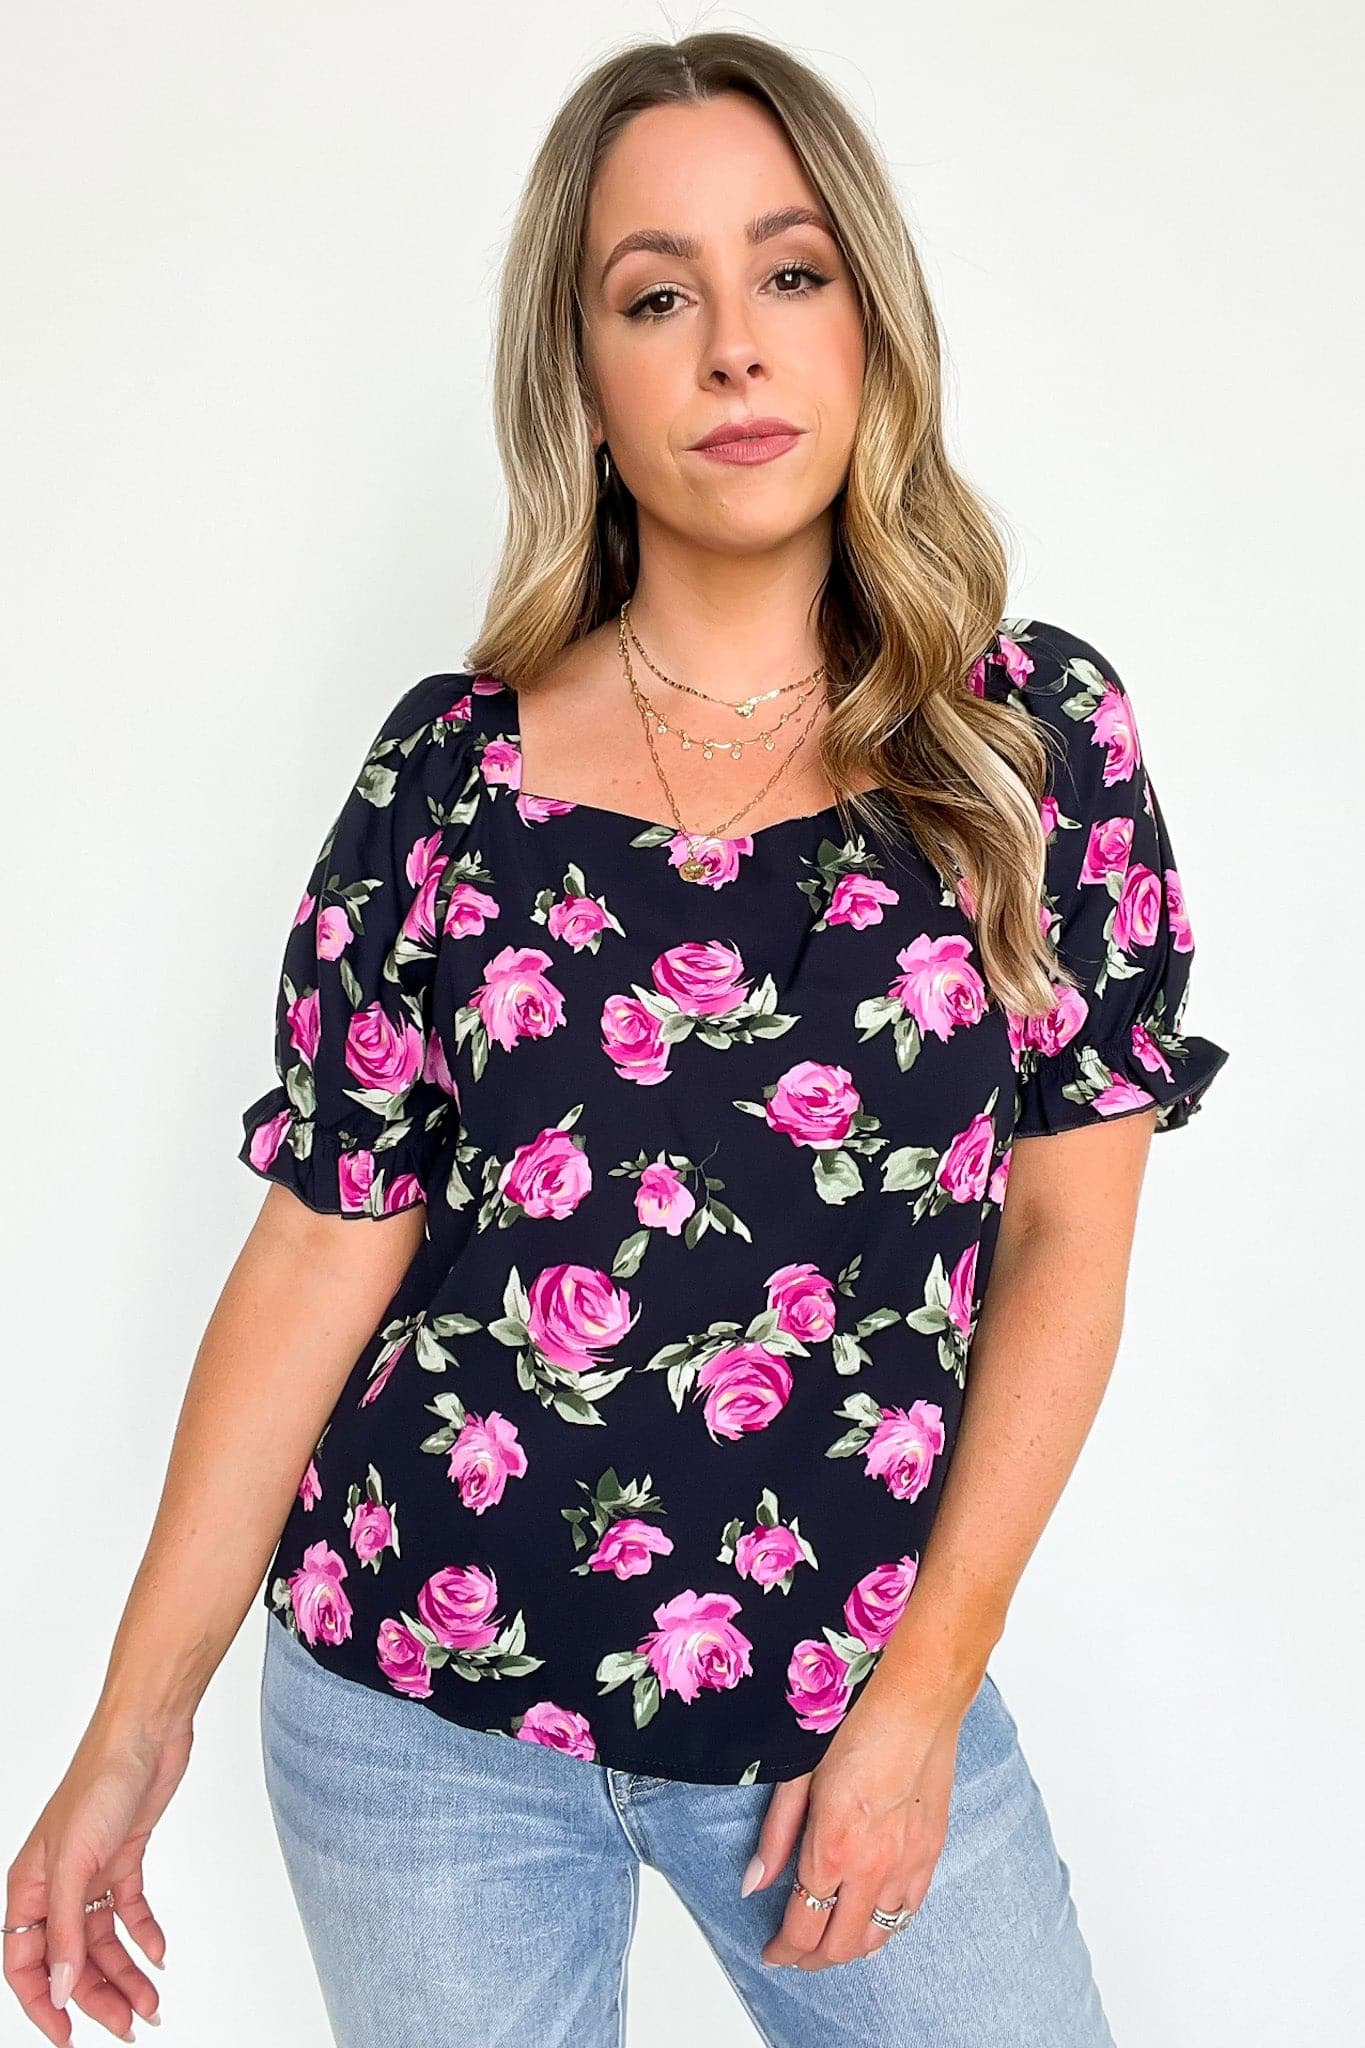  Sweetly Blooming Floral Puff Sleeve Top - FINAL SALE - Madison and Mallory